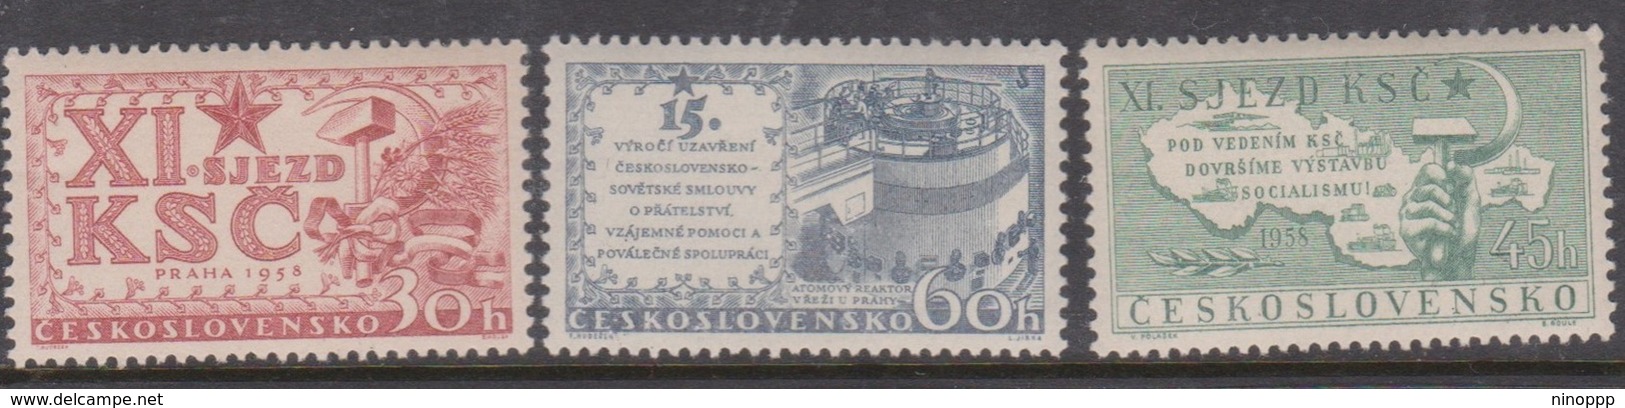 Czechoslovakia SG 1033-1035 1958 11th Communist Party Congress, Mint Never Hinged - Unused Stamps